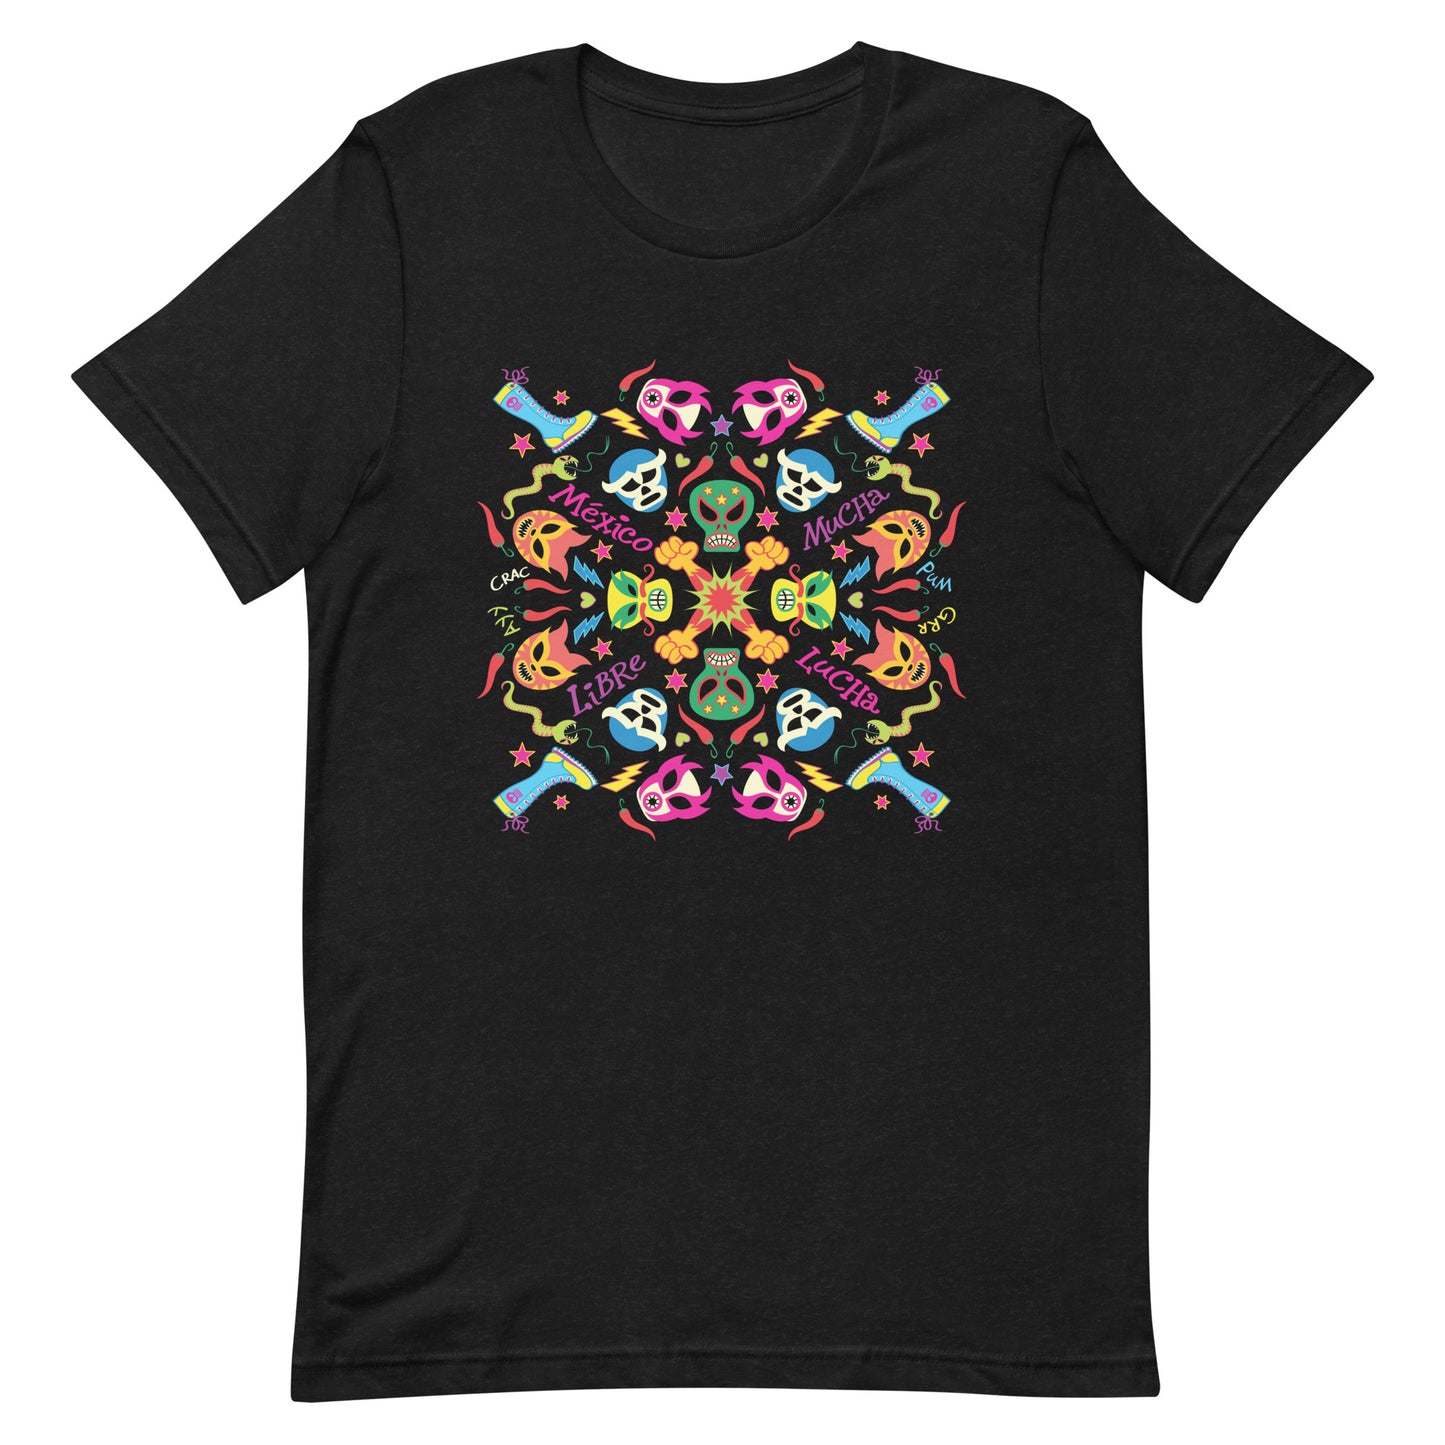 Mexican wrestling colorful party Unisex t-shirt. Front view. Black heather